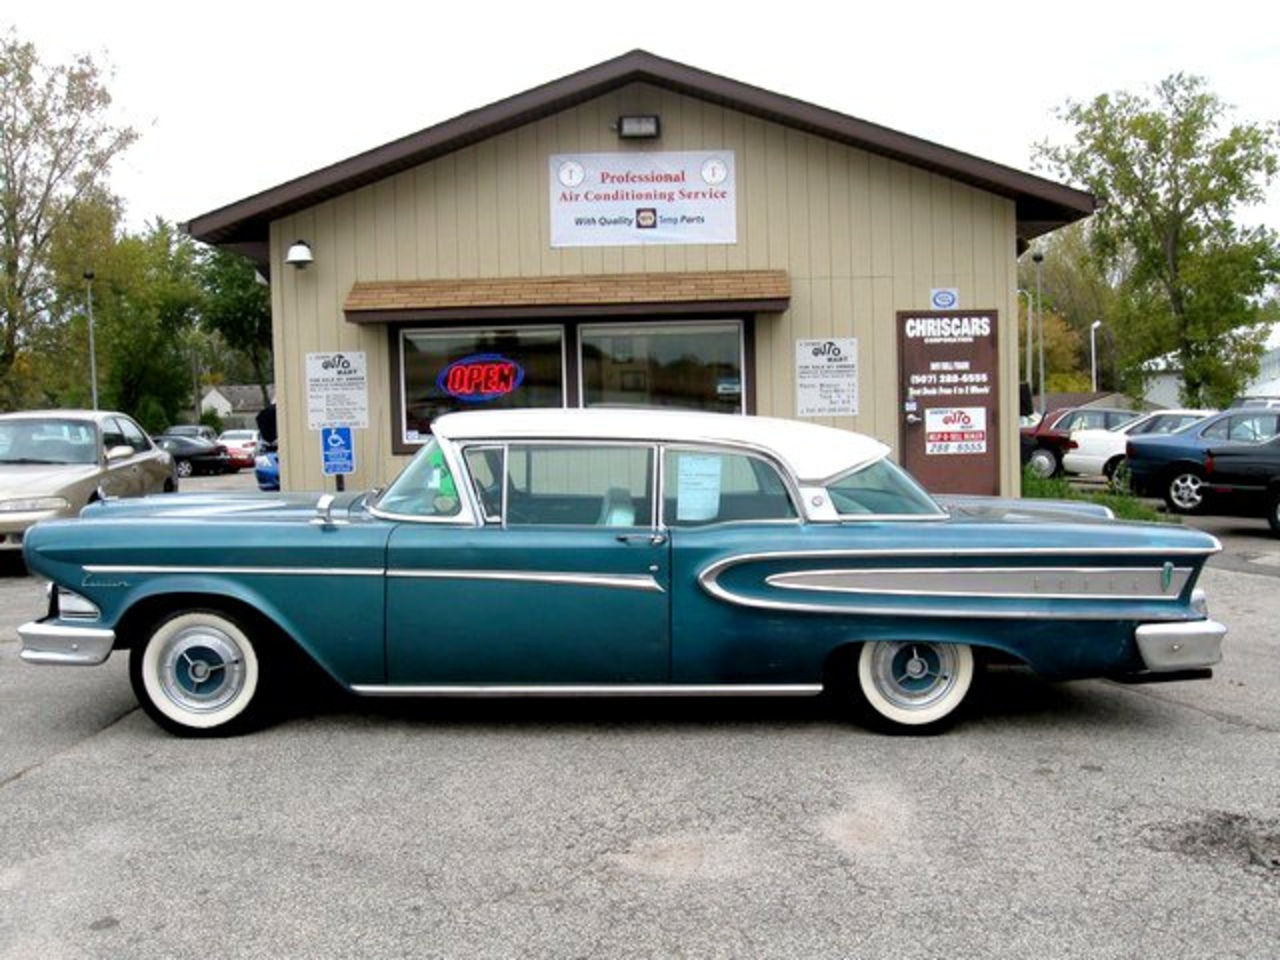 Edsel Ciation Coupe Photo Gallery: Photo #06 out of 12, Image Size ...